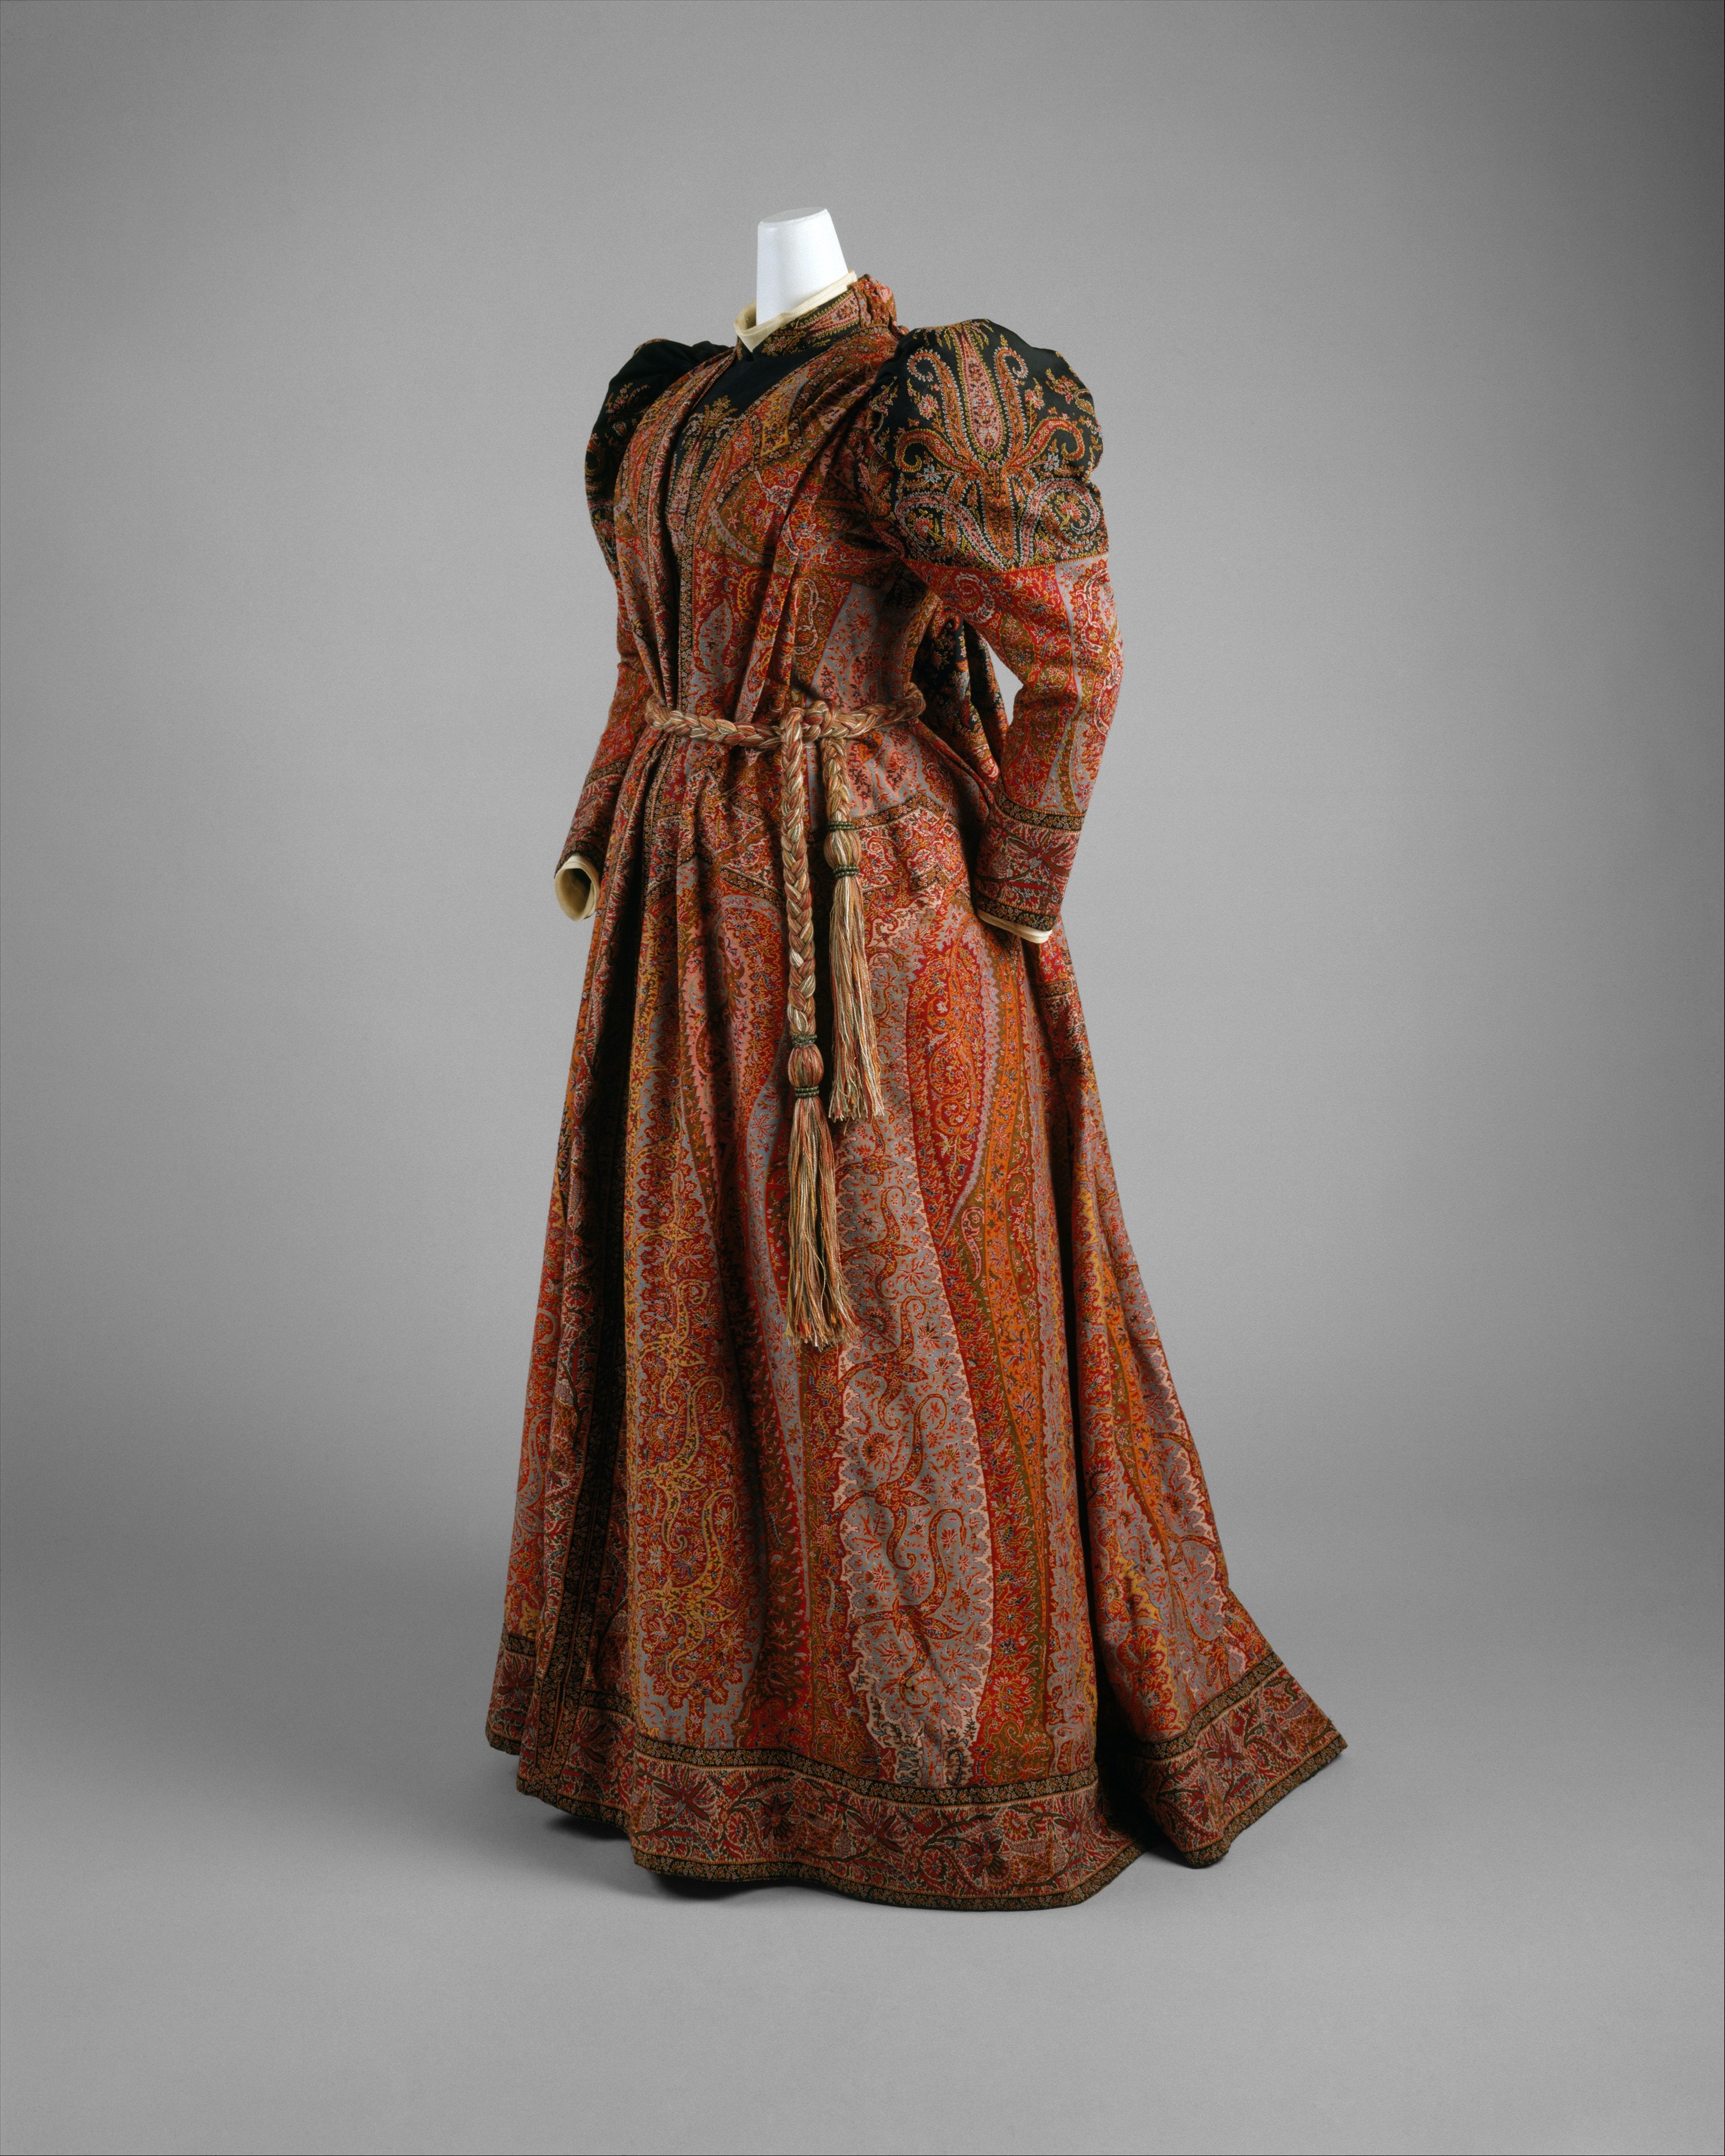 Dress dye analysis points to fast-moving fashion in 19th century, Research